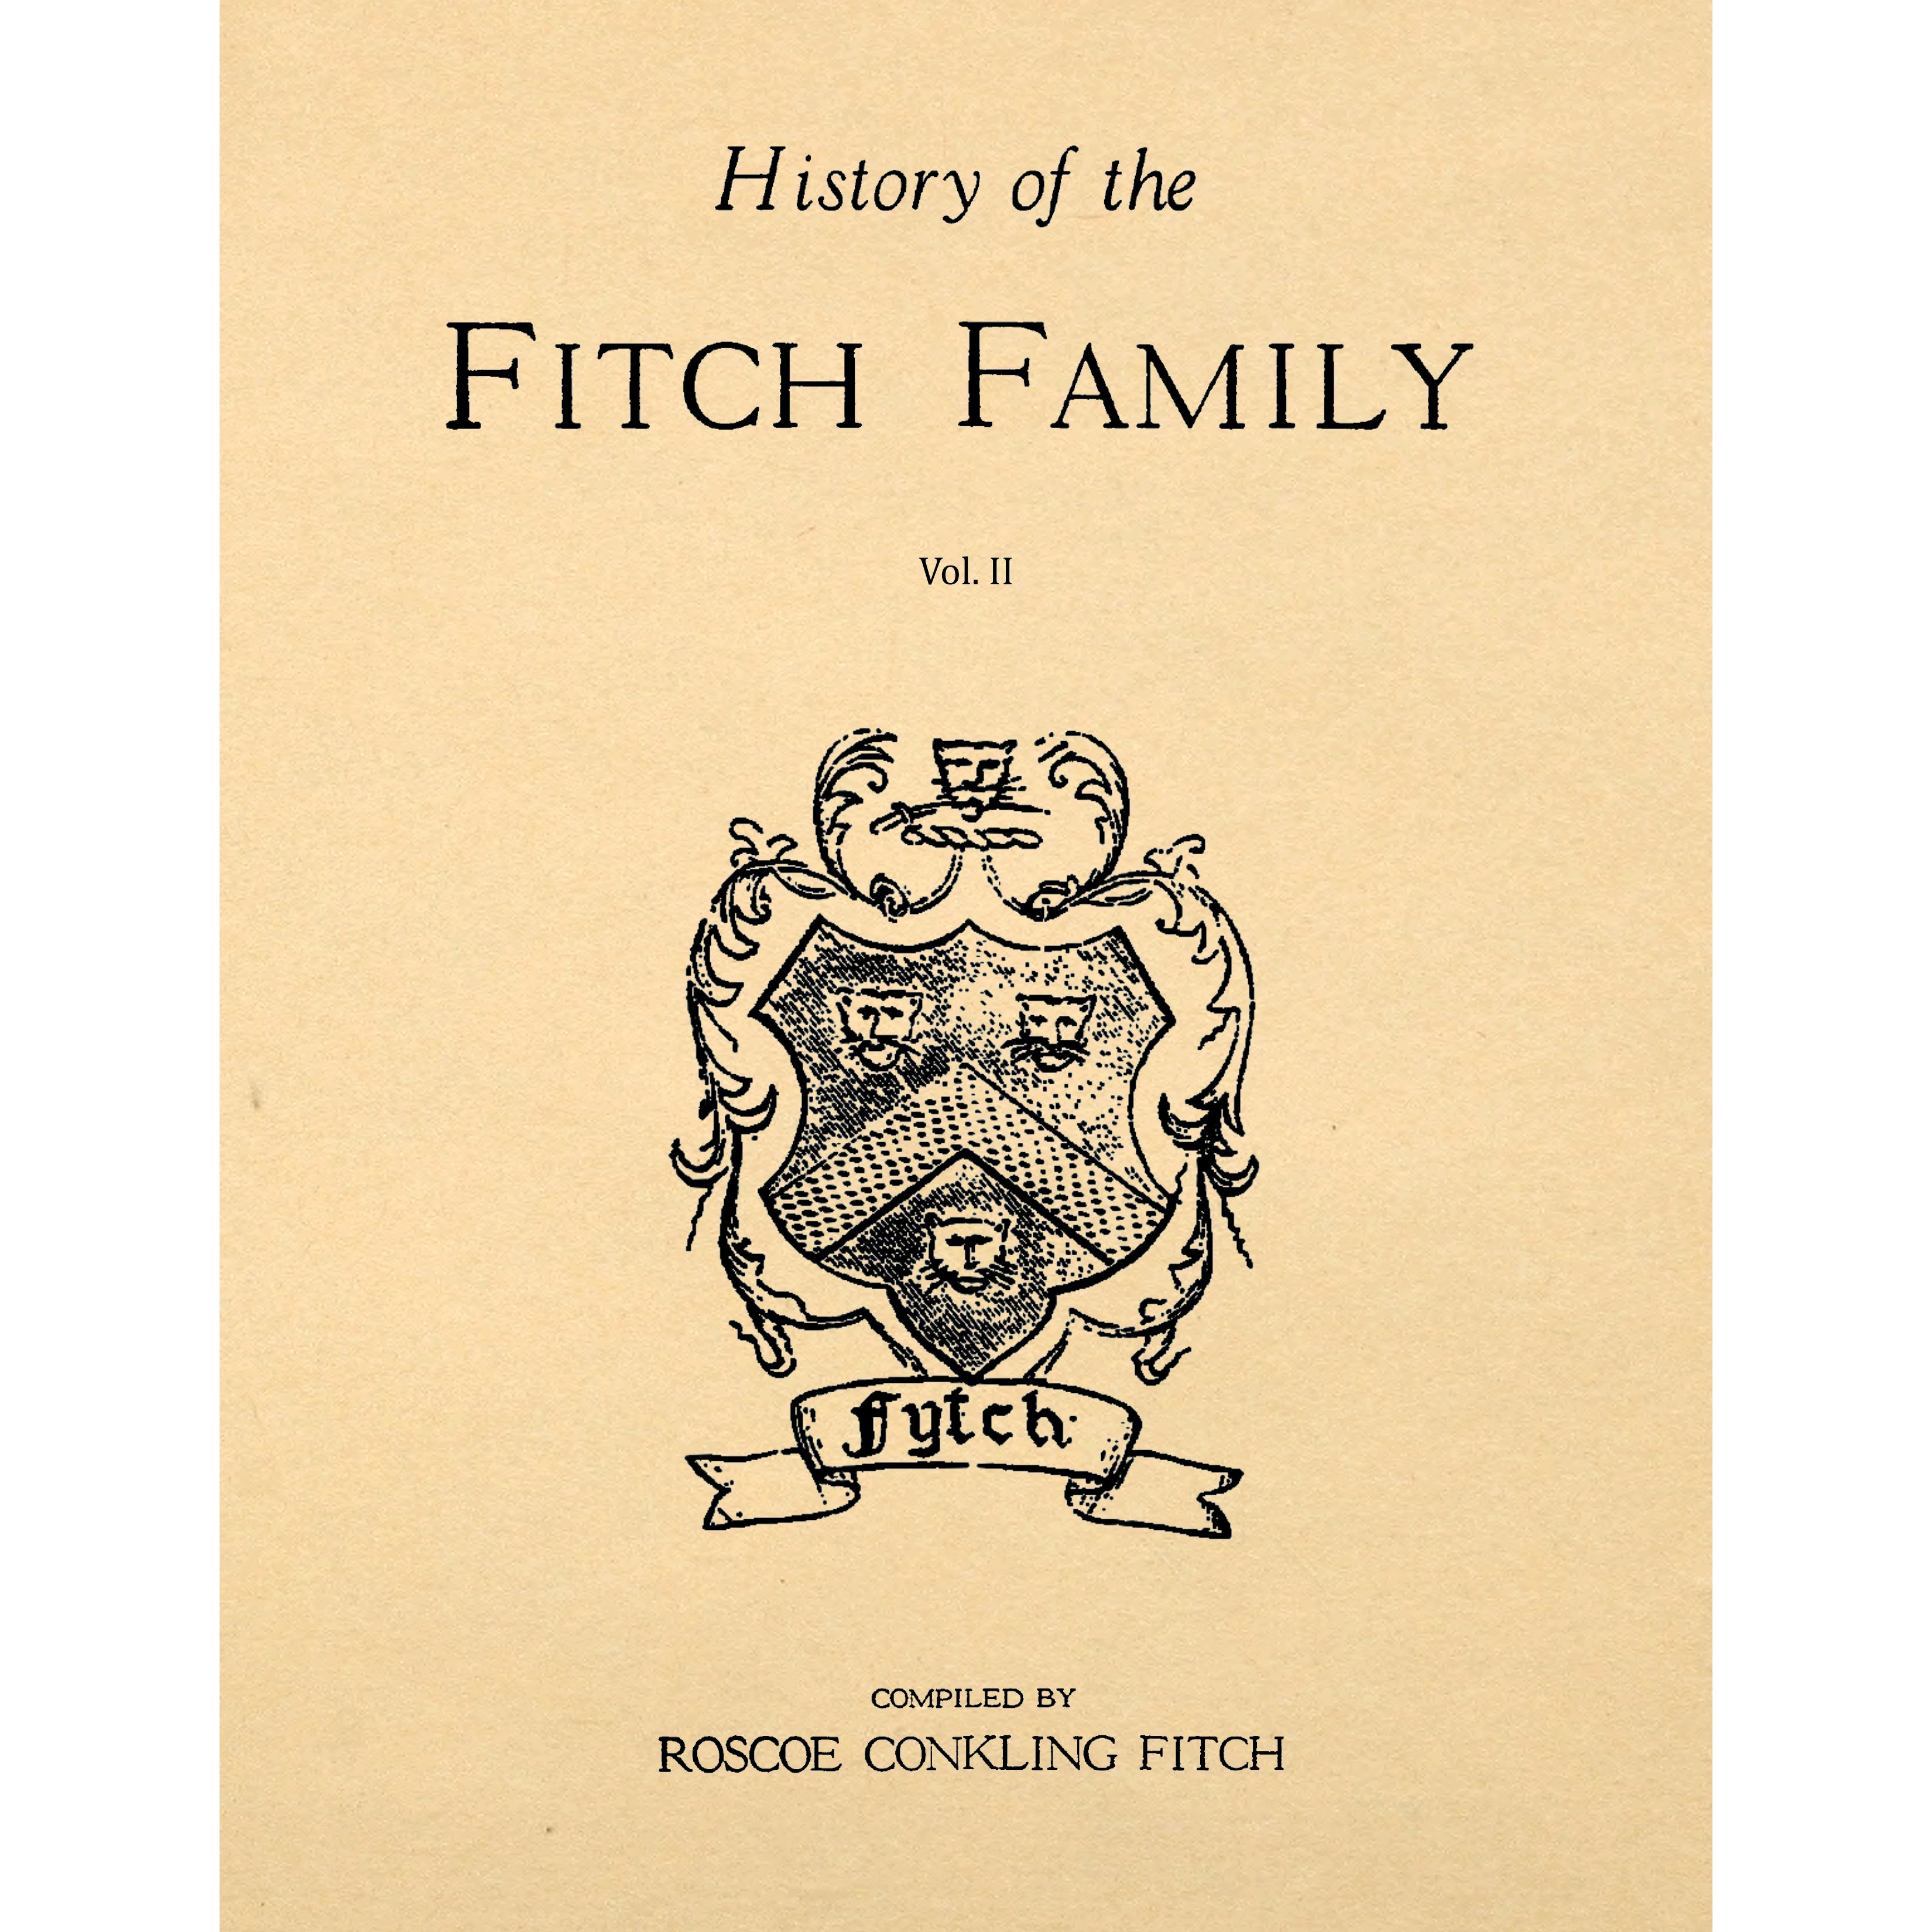 History Of The Fitch Family A.D. 1400 -- 1930